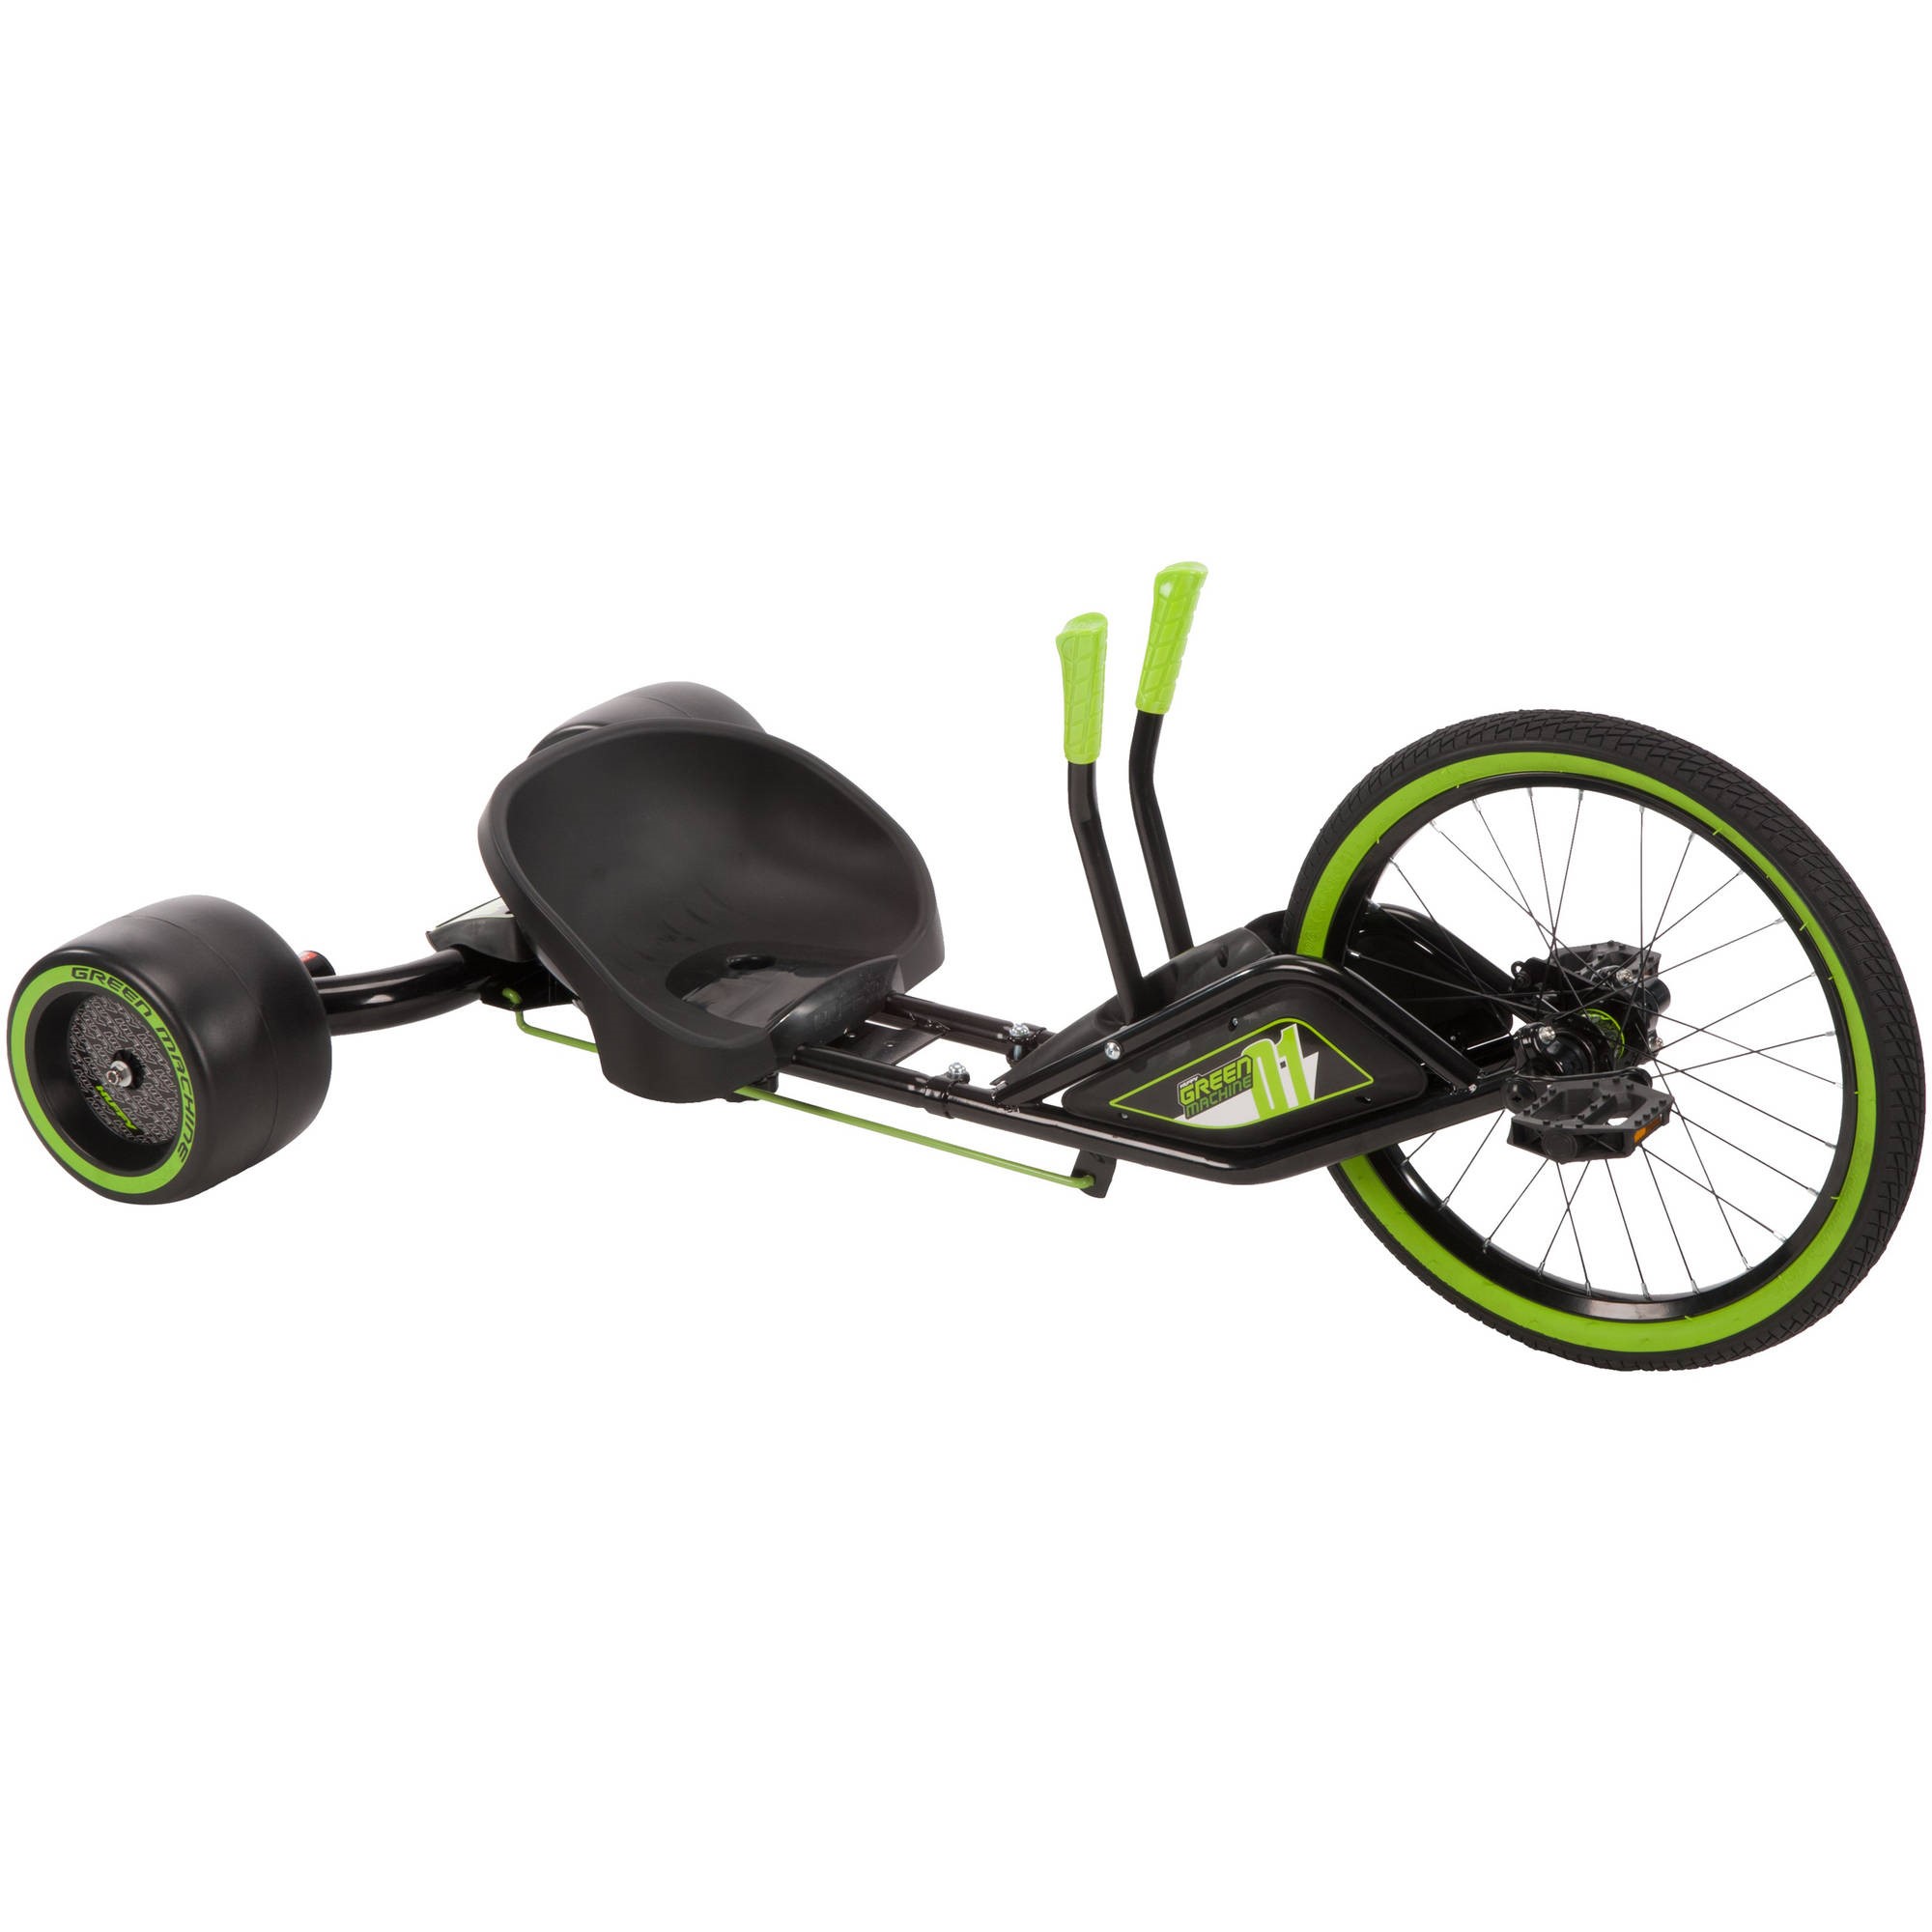 Huffy Green Machine RT 20-Inch 3-Wheel Tricycle in Green and Black - image 2 of 4